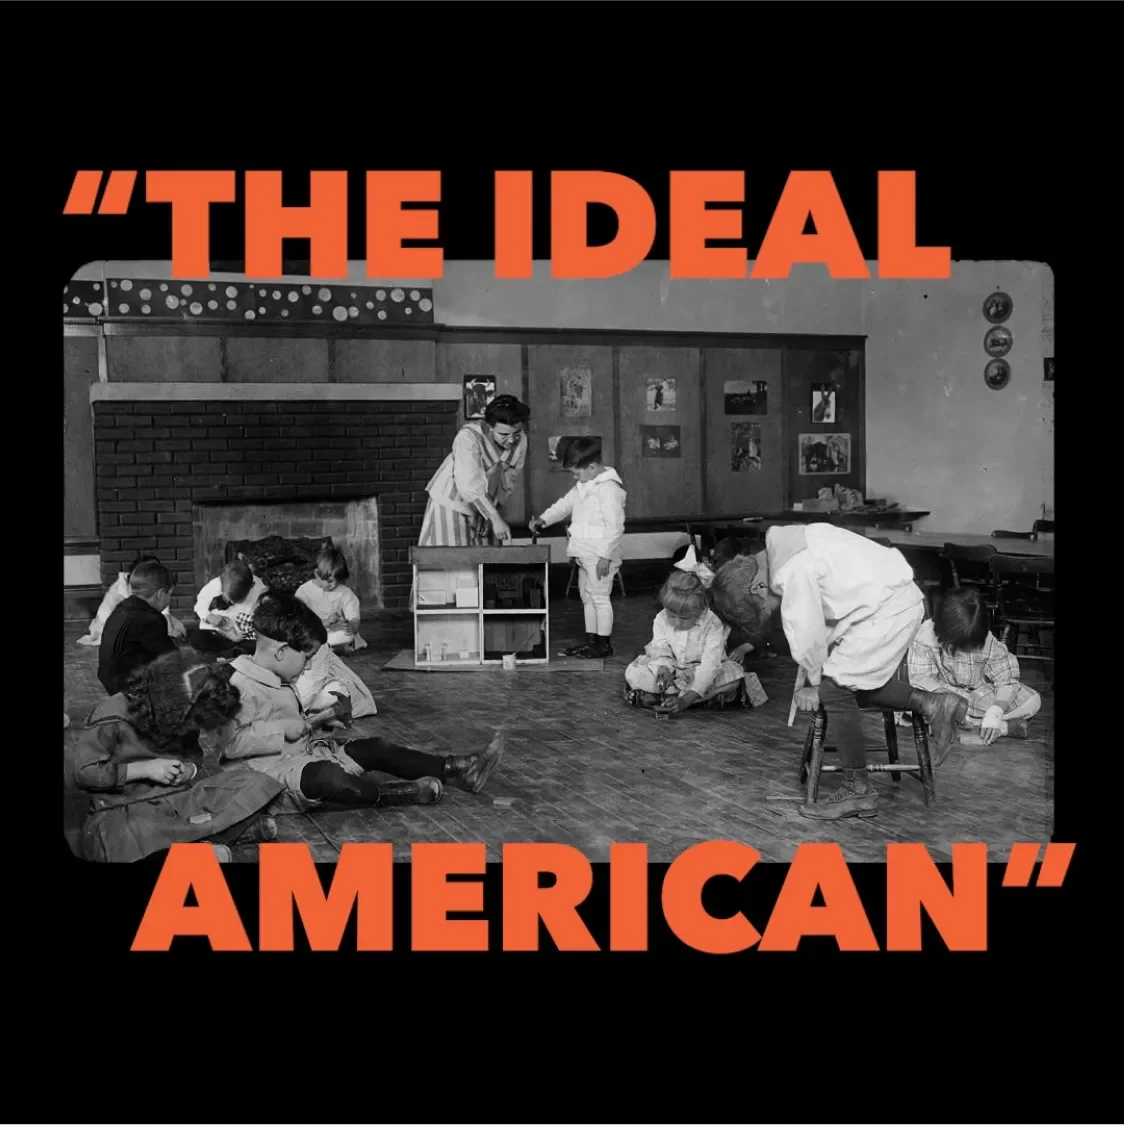 Typographic still showing a classroom from the past and "The Ideal American"